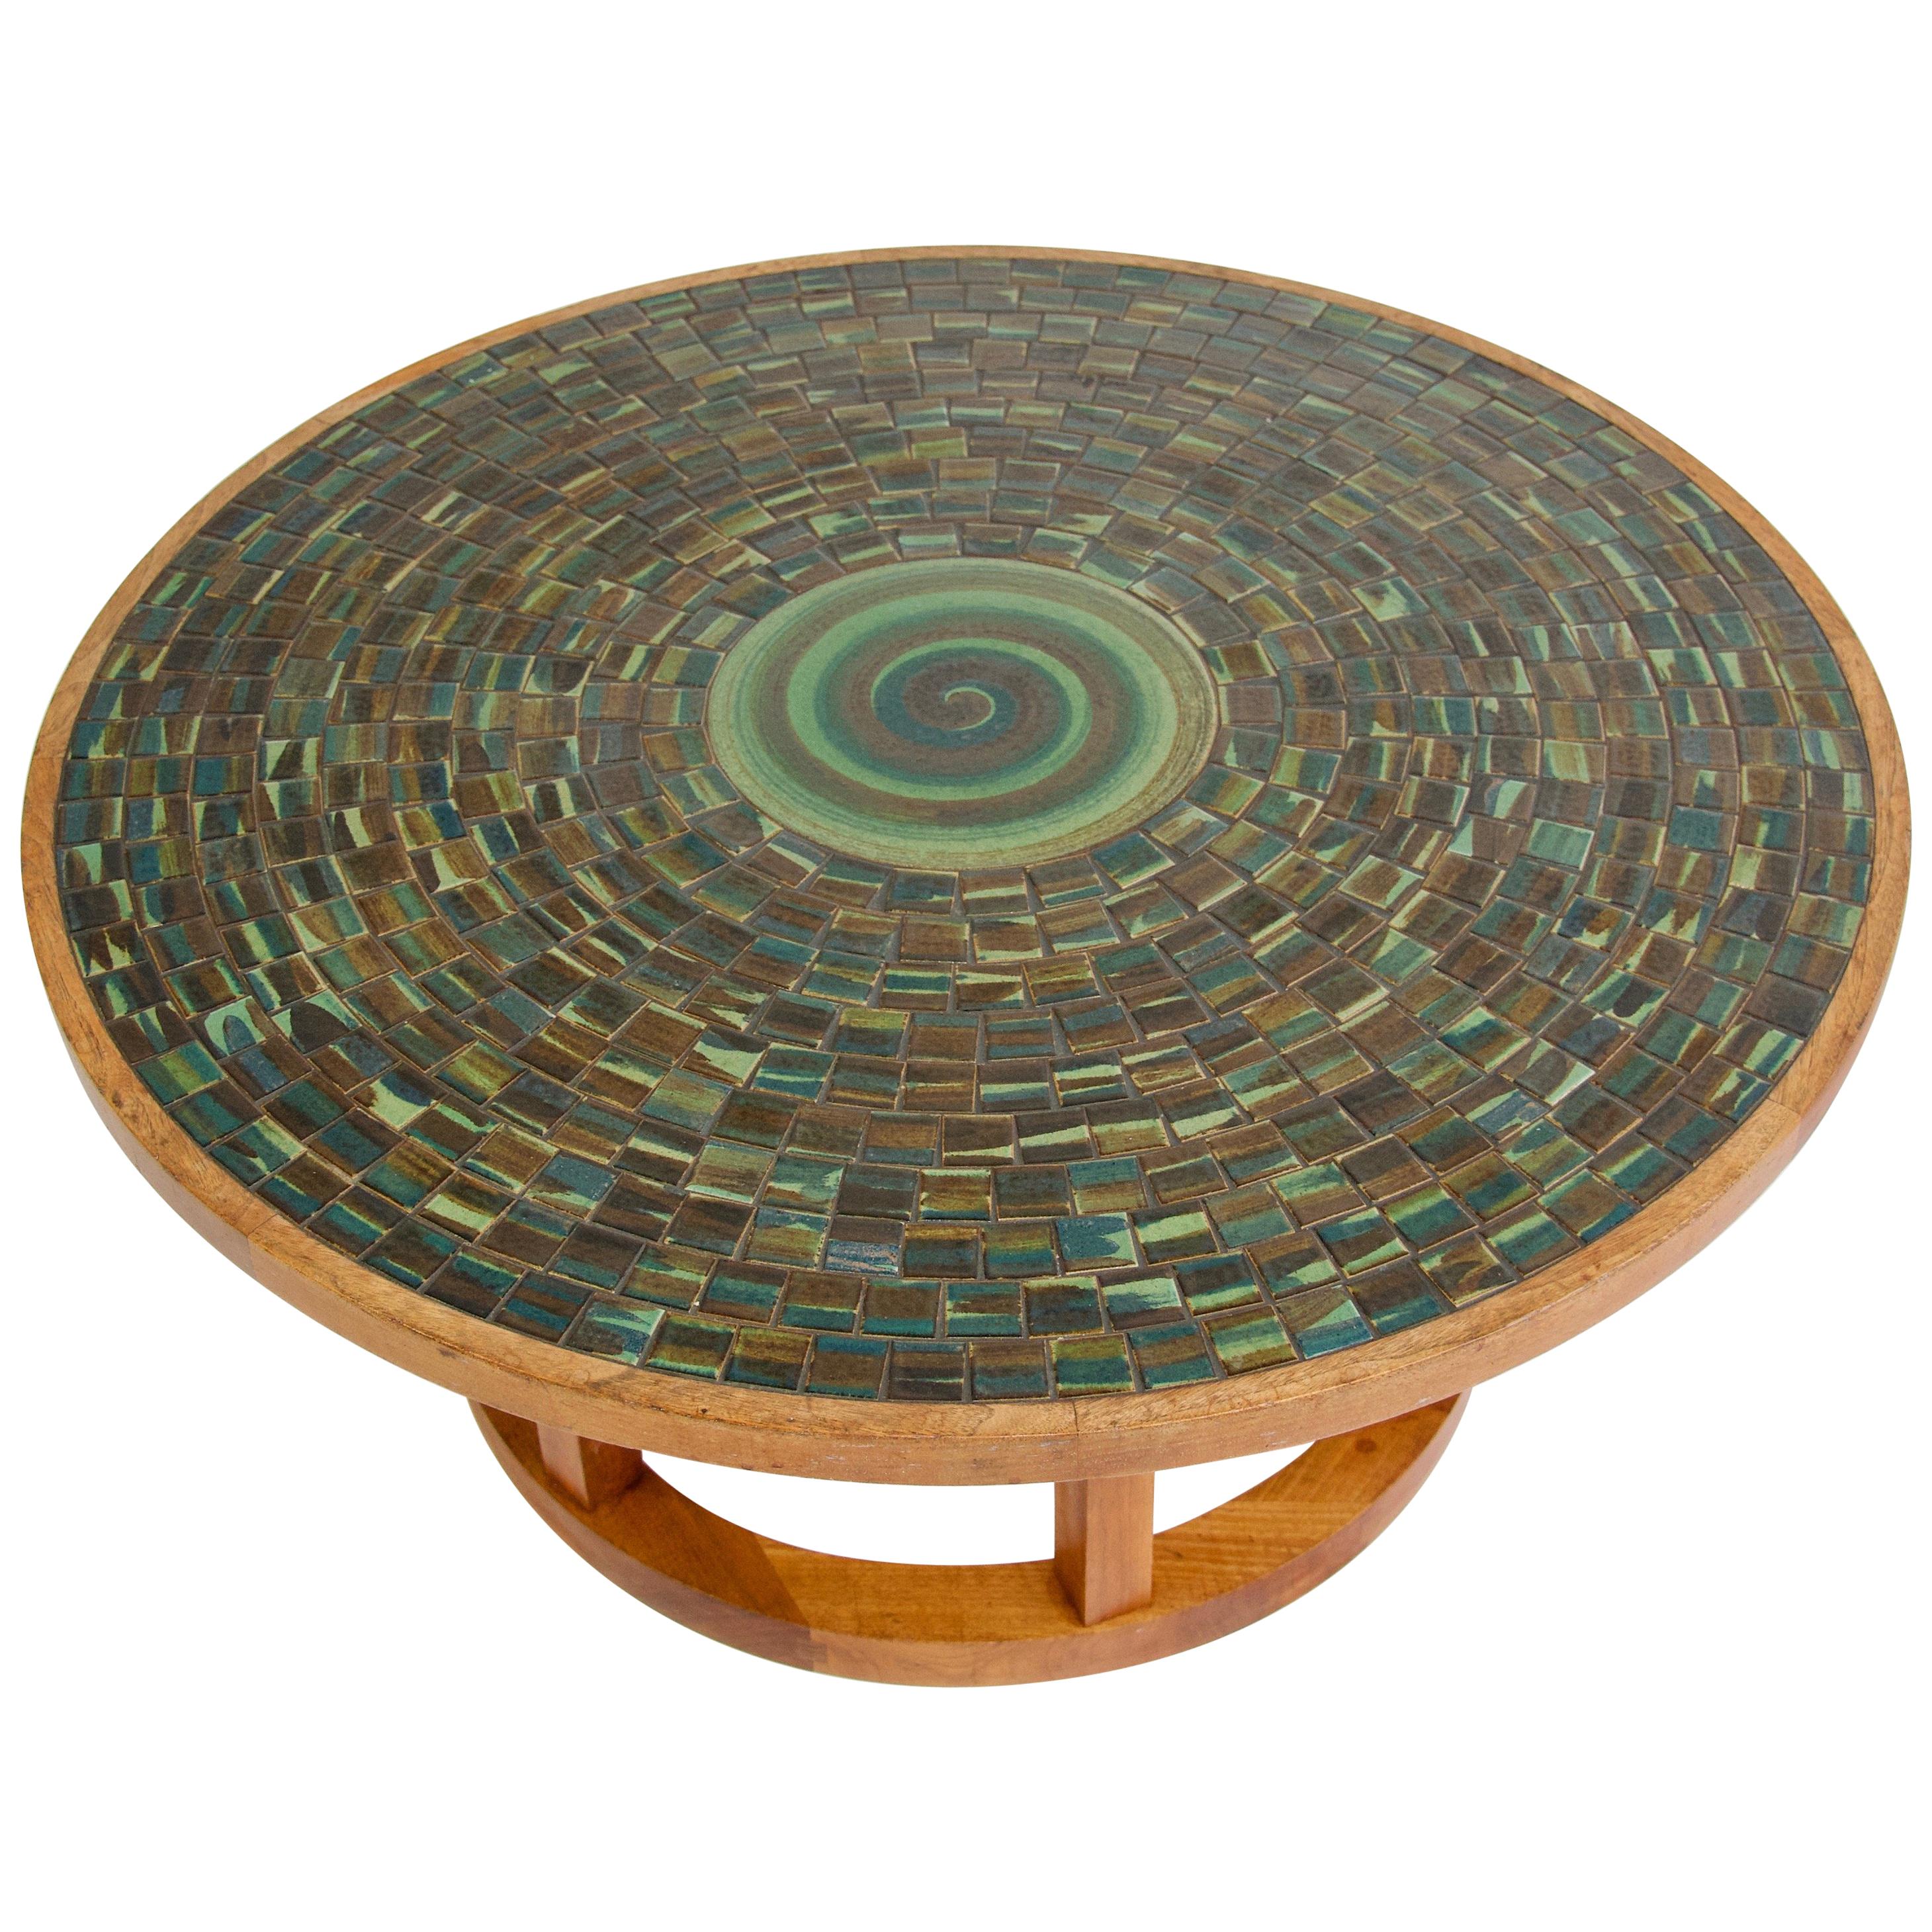 Ceramic Tile-Top Coffee Table by Gordon and Jane Martz For Sale